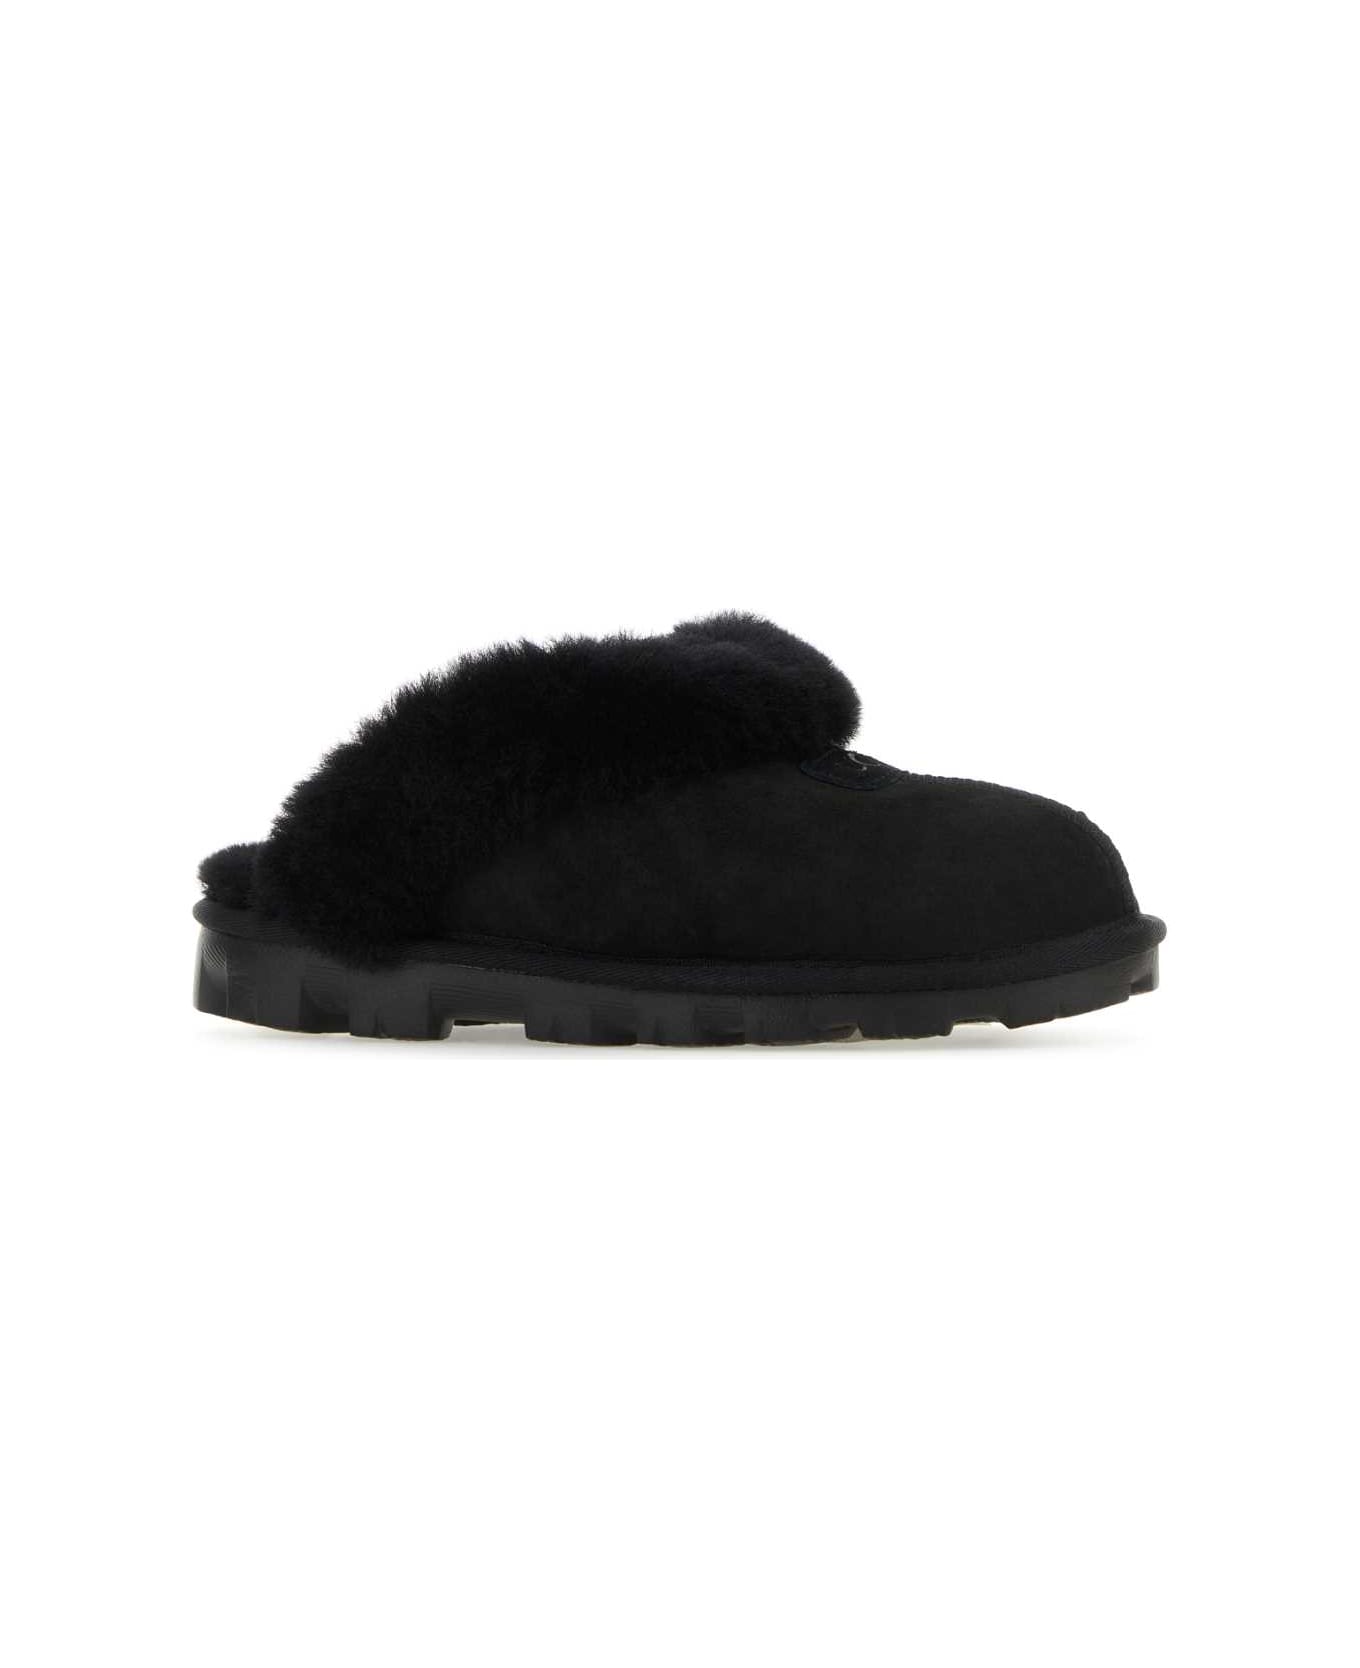 UGG Black Suede Coquette Slippers - BLACK